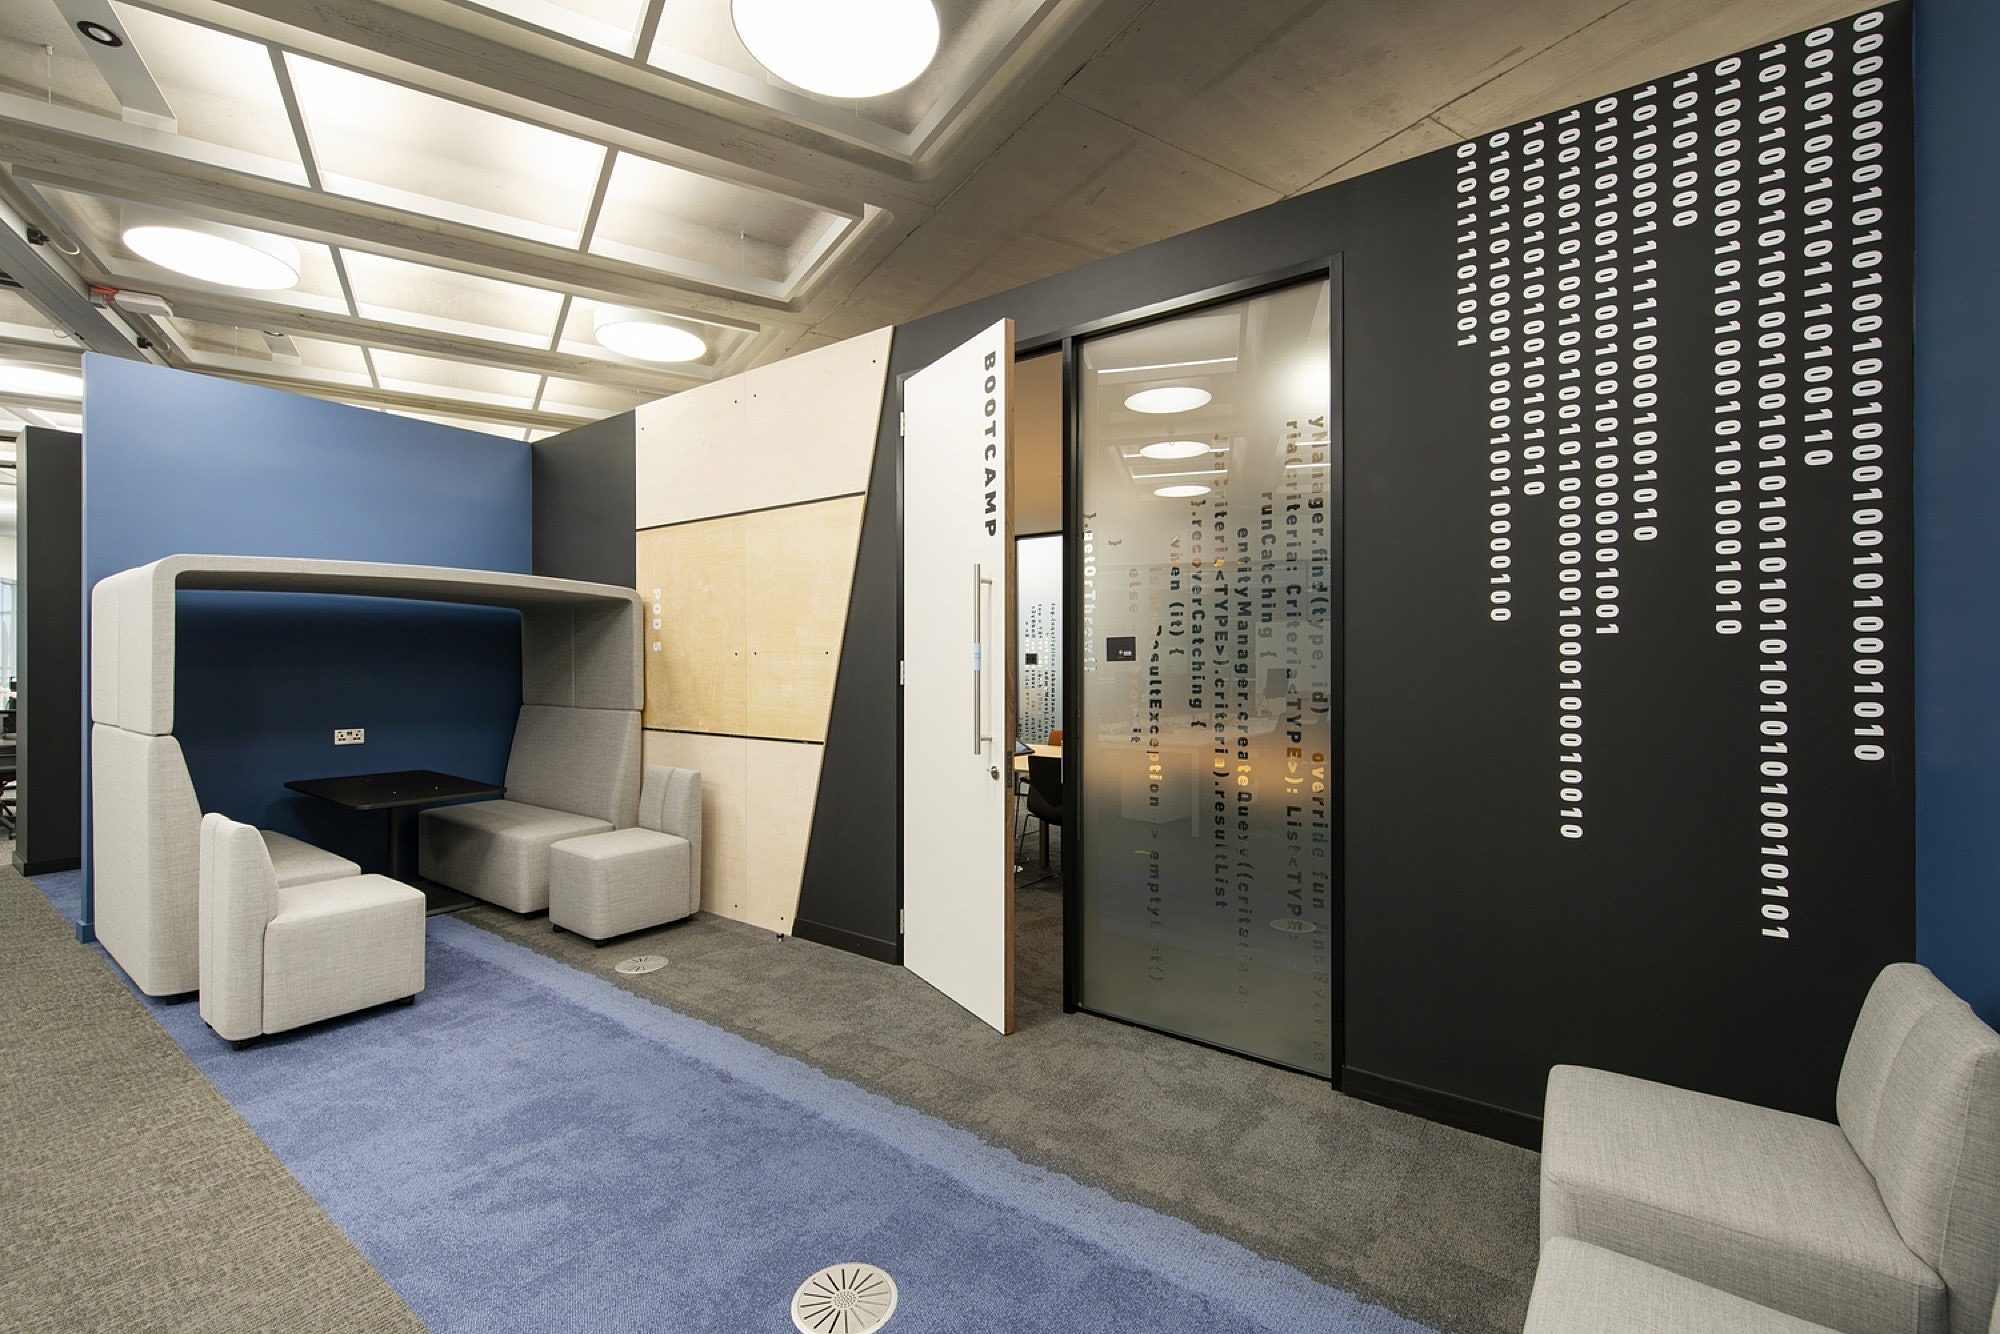 Metapack office fit out